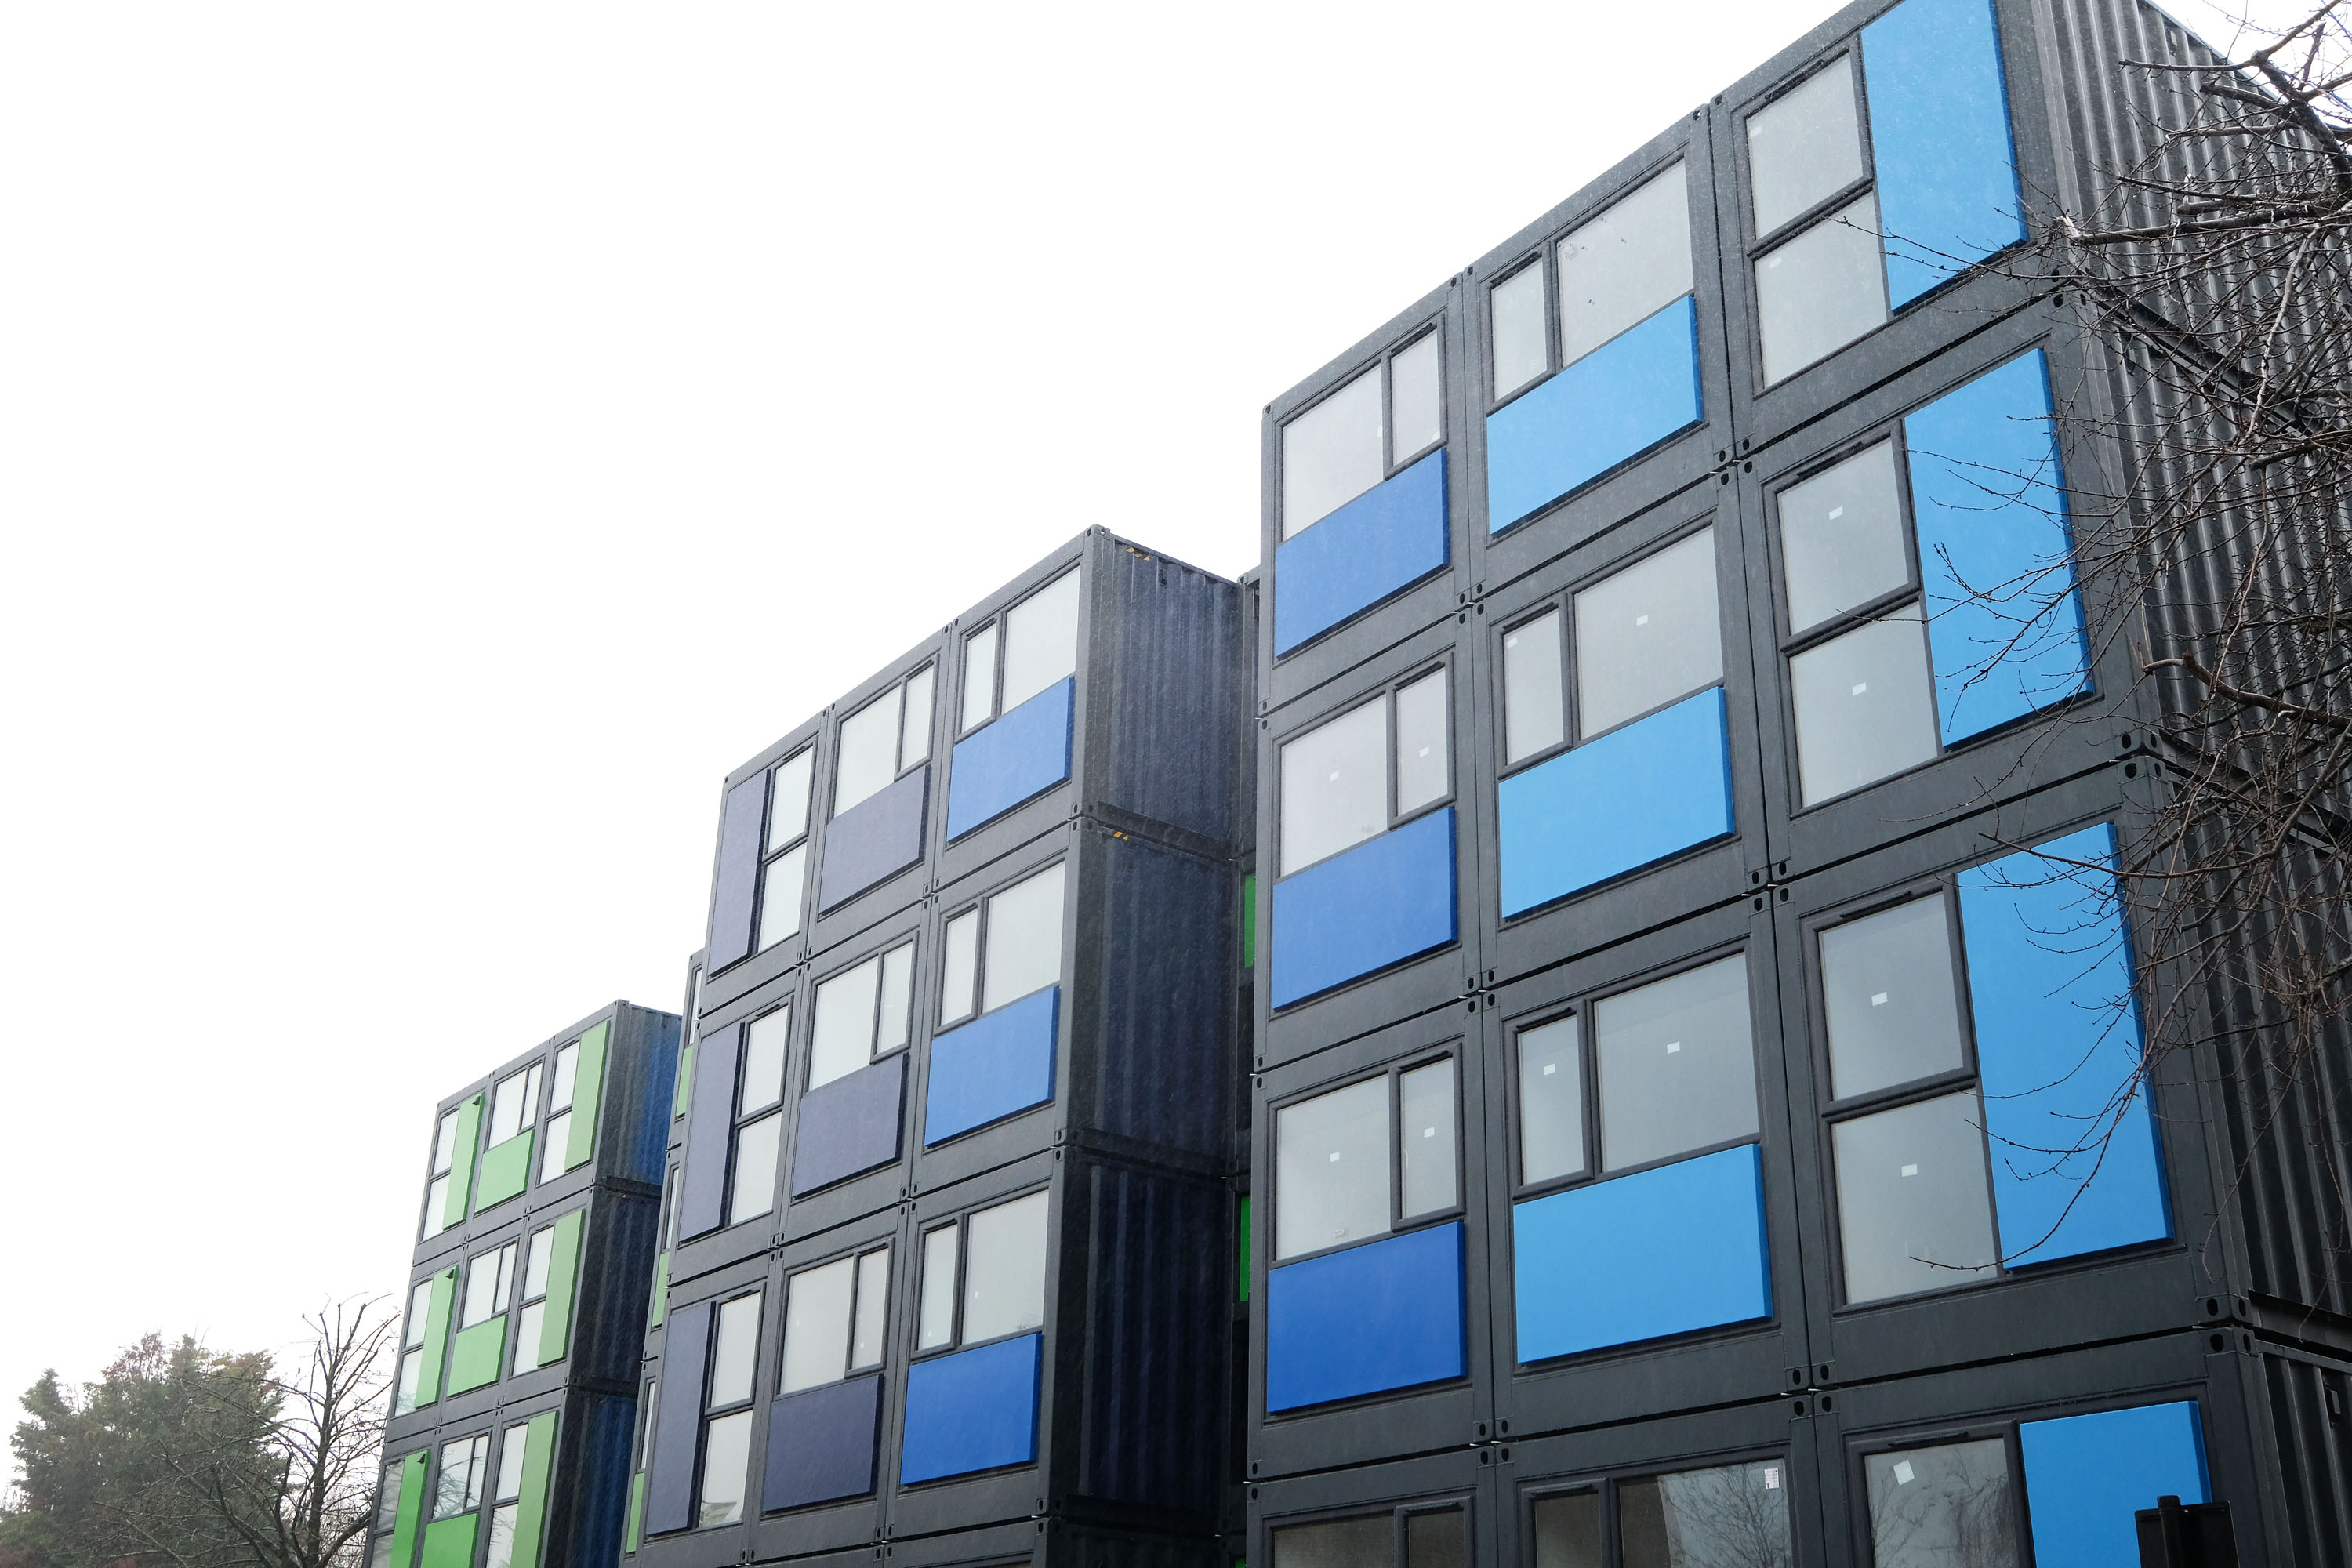 The UK’s largest temporary accommodation development is to open in Ealing